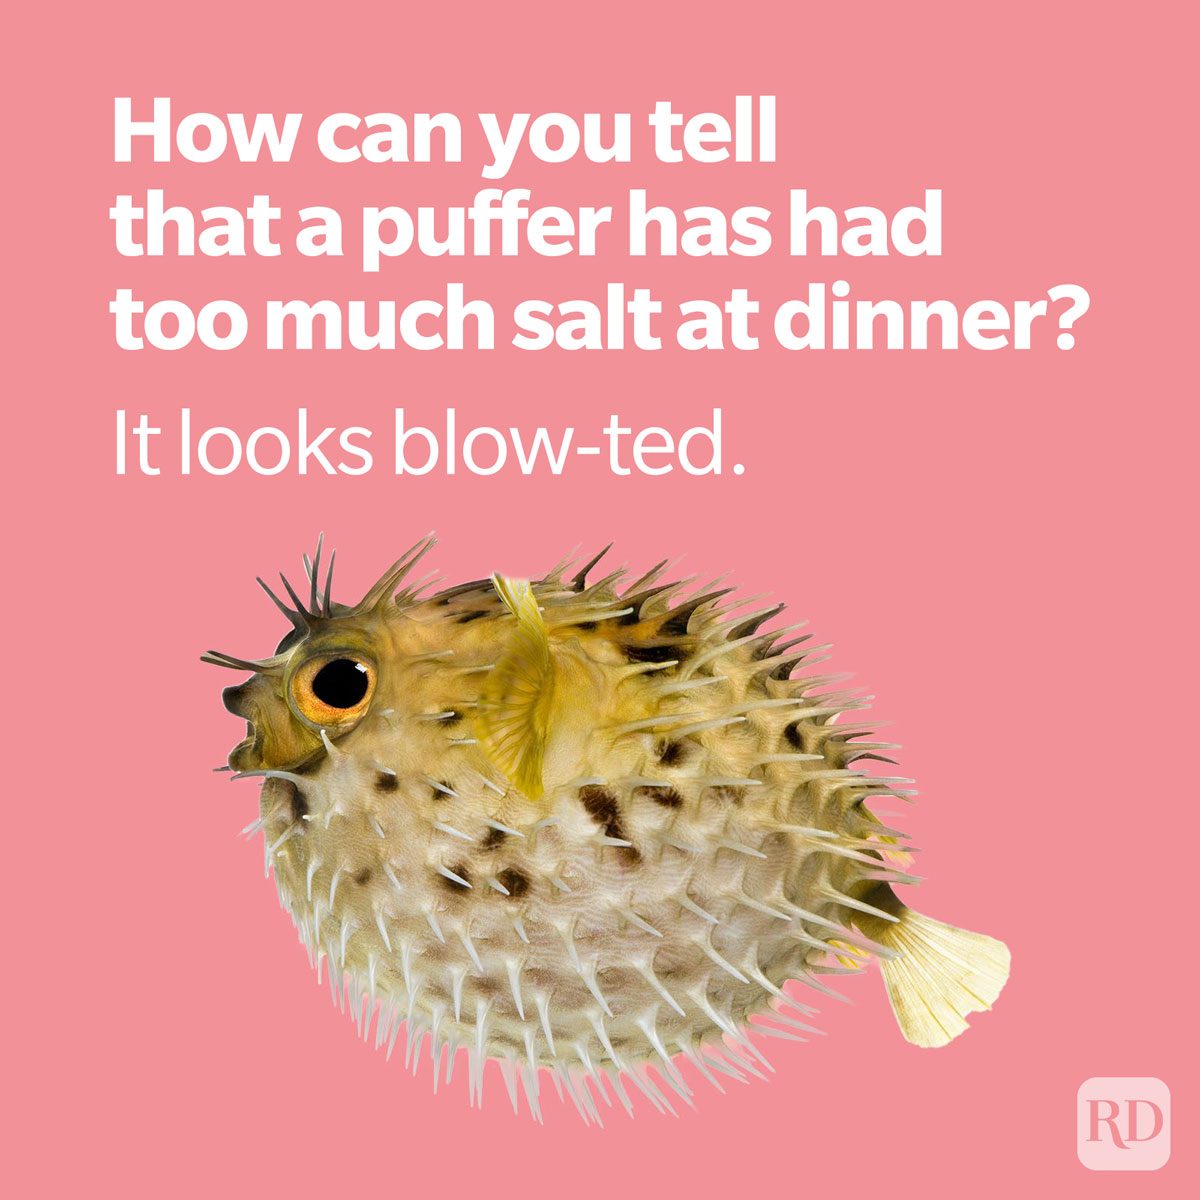 fish pun about a blow-ted pufferfish who had too much salt at dinner